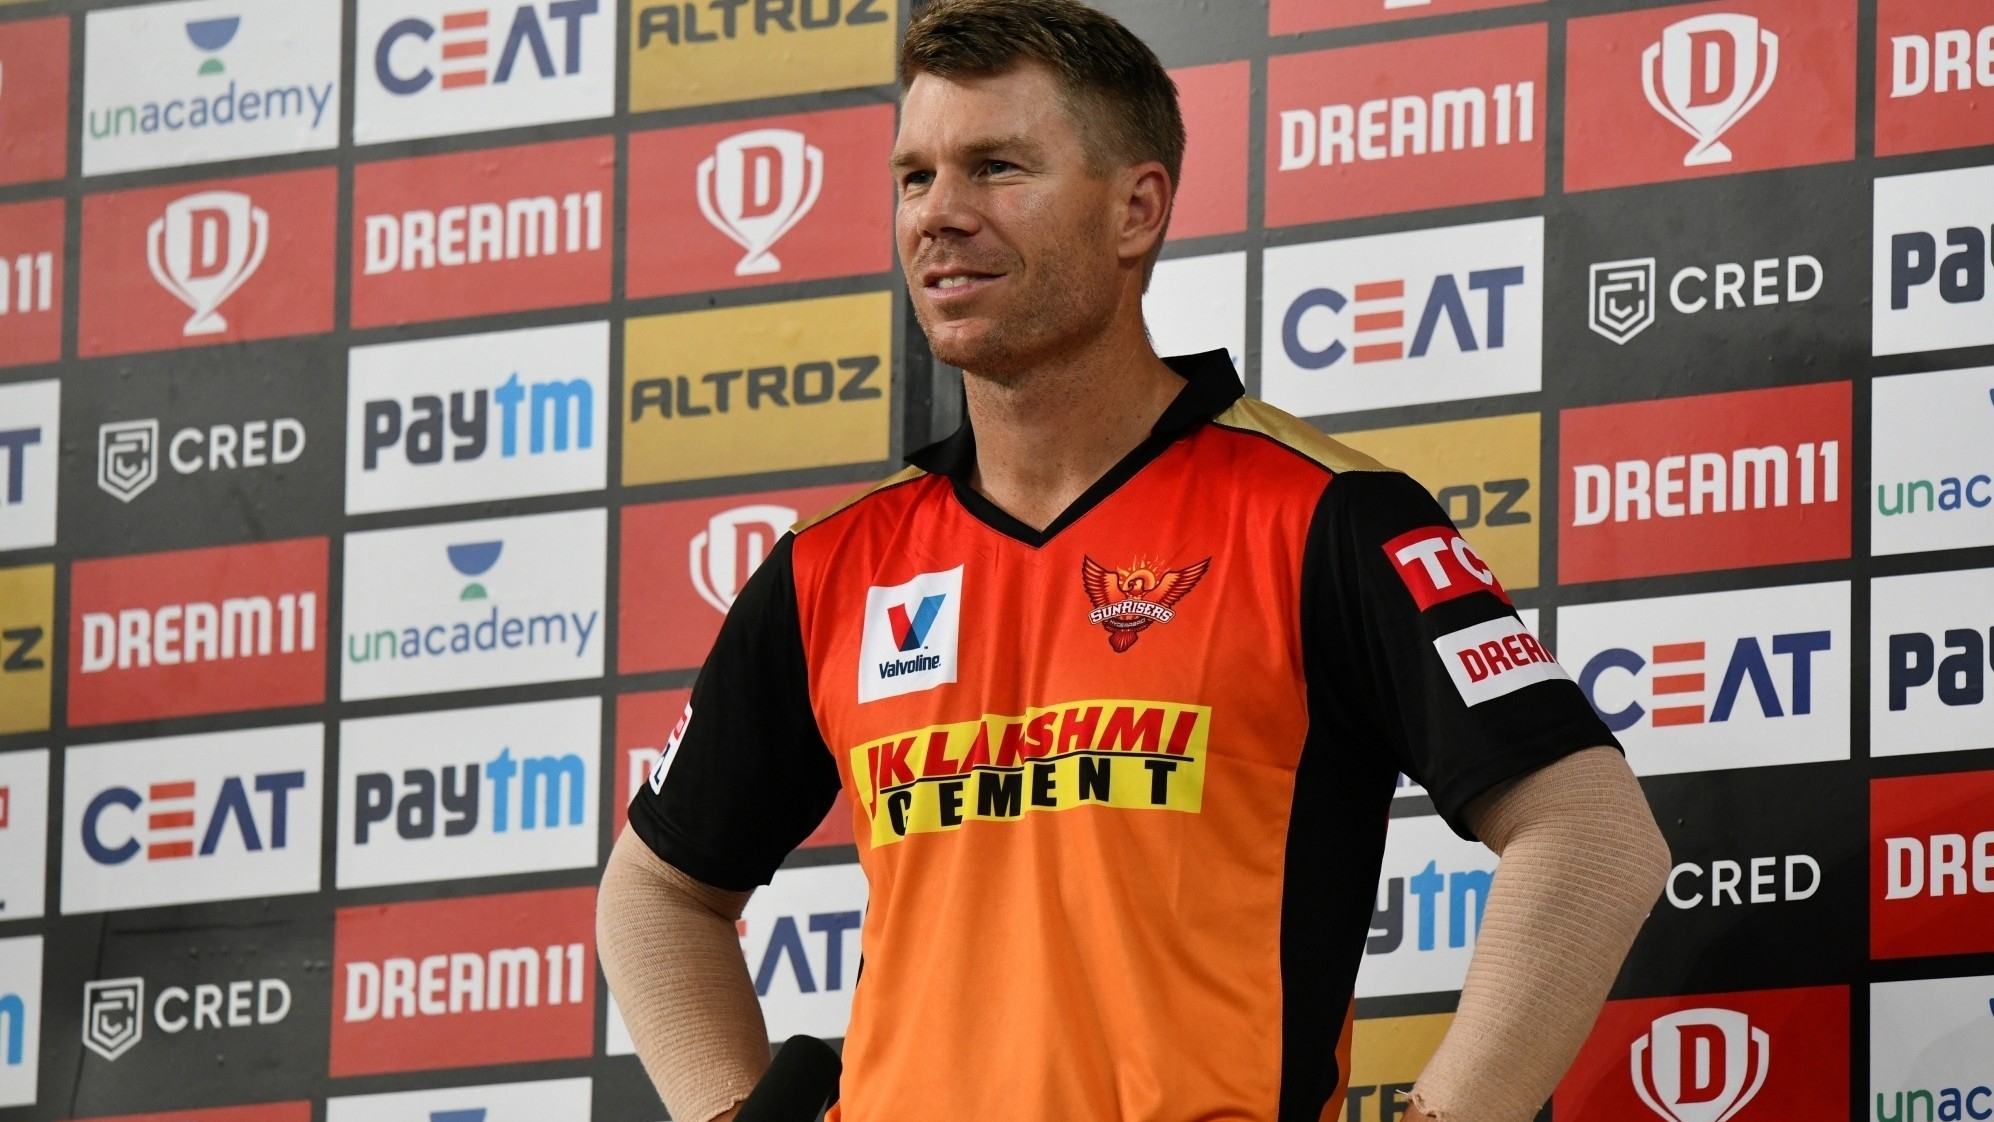 IPL 2020: David Warner not surprised to see dew in Sharjah during SRH’s thumping win over RCB